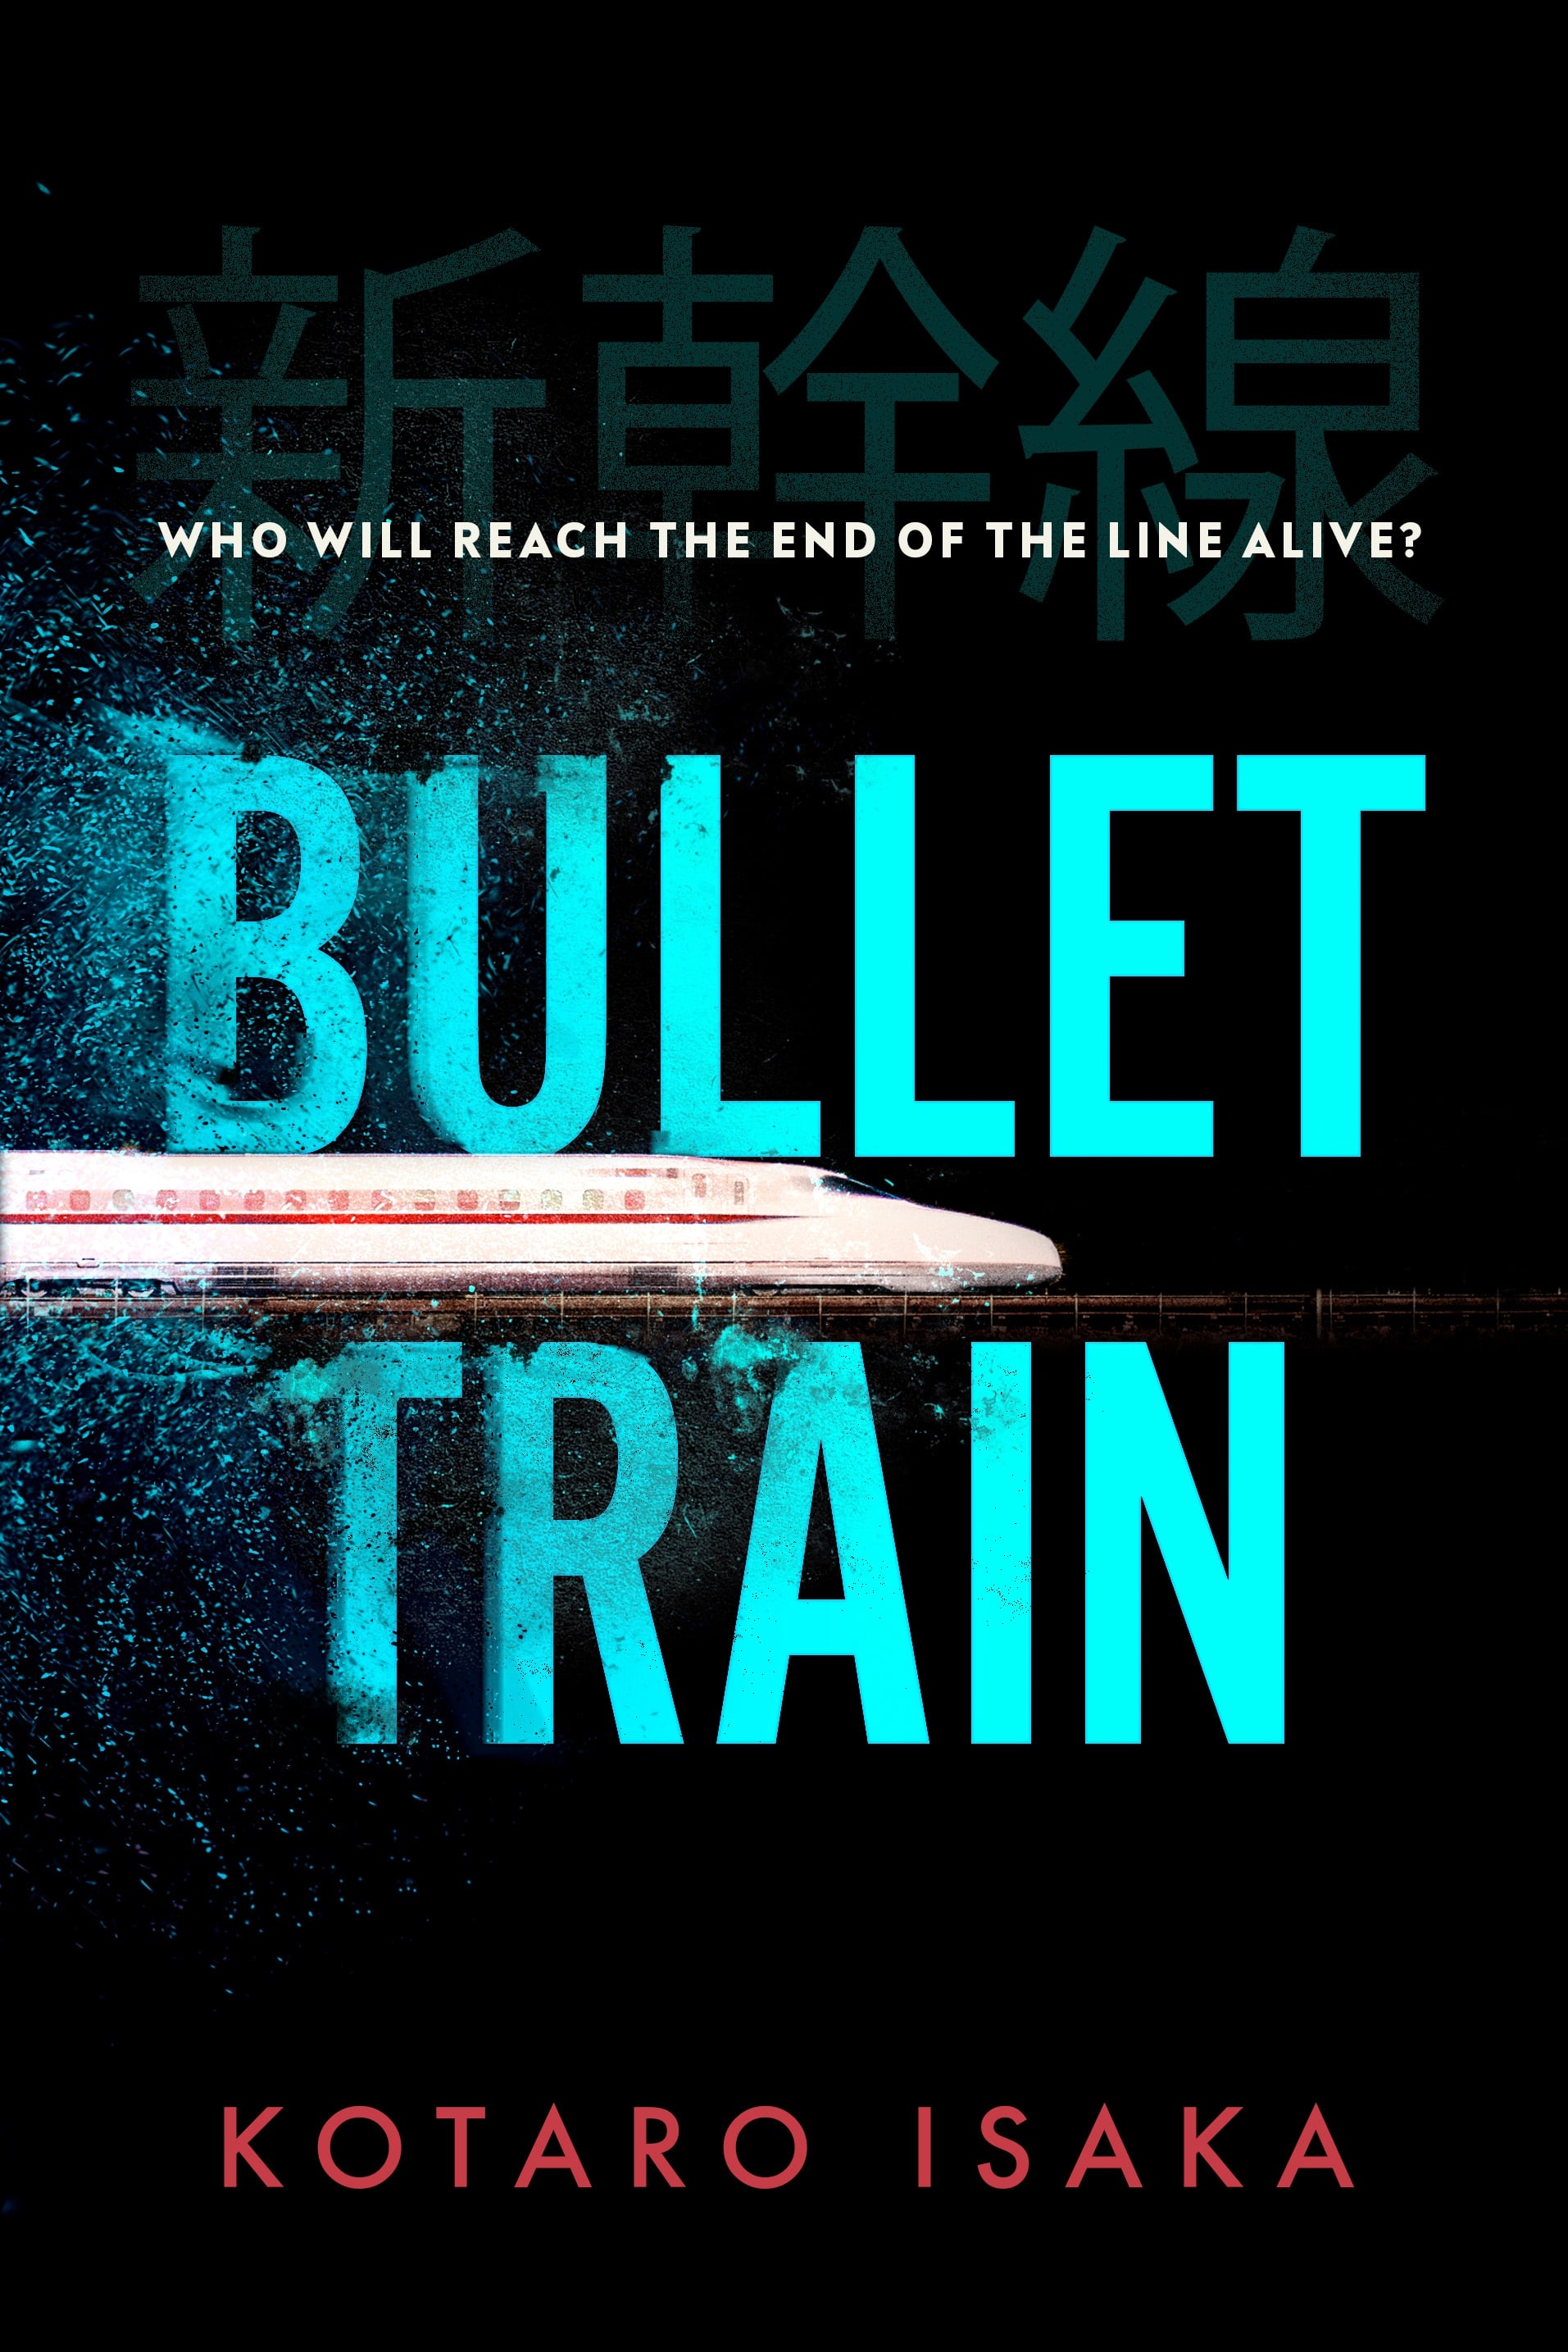 Bullet Train by Kotaro Isaka, one of the best new crime books by a debut author